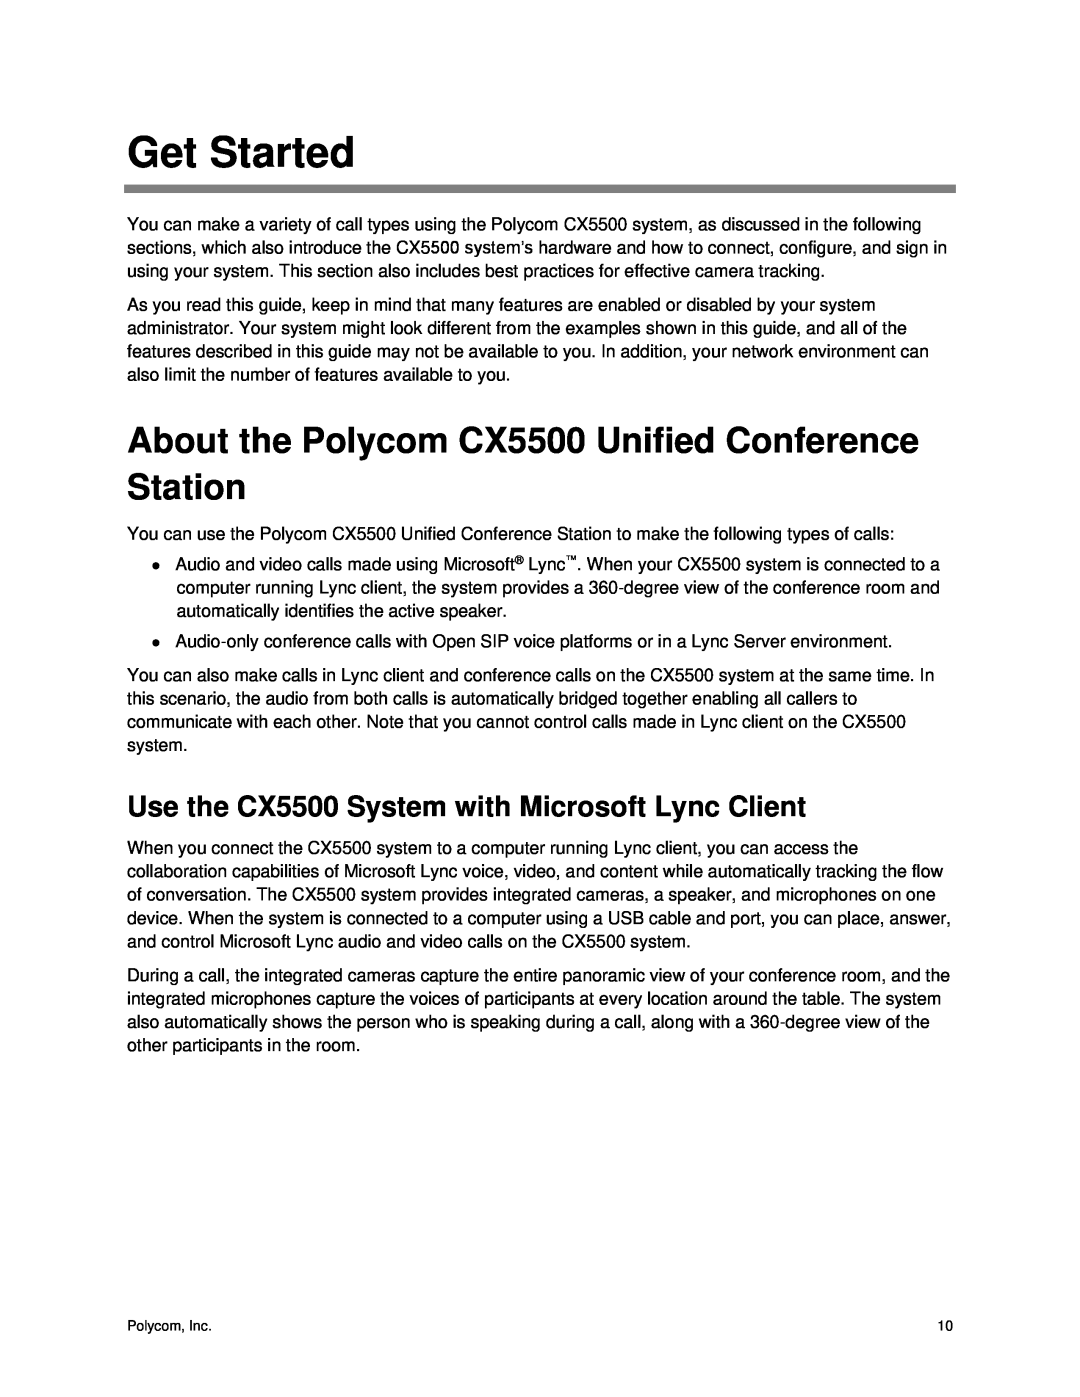 Polycom manual Get Started, About the Polycom CX5500 Unified Conference Station 